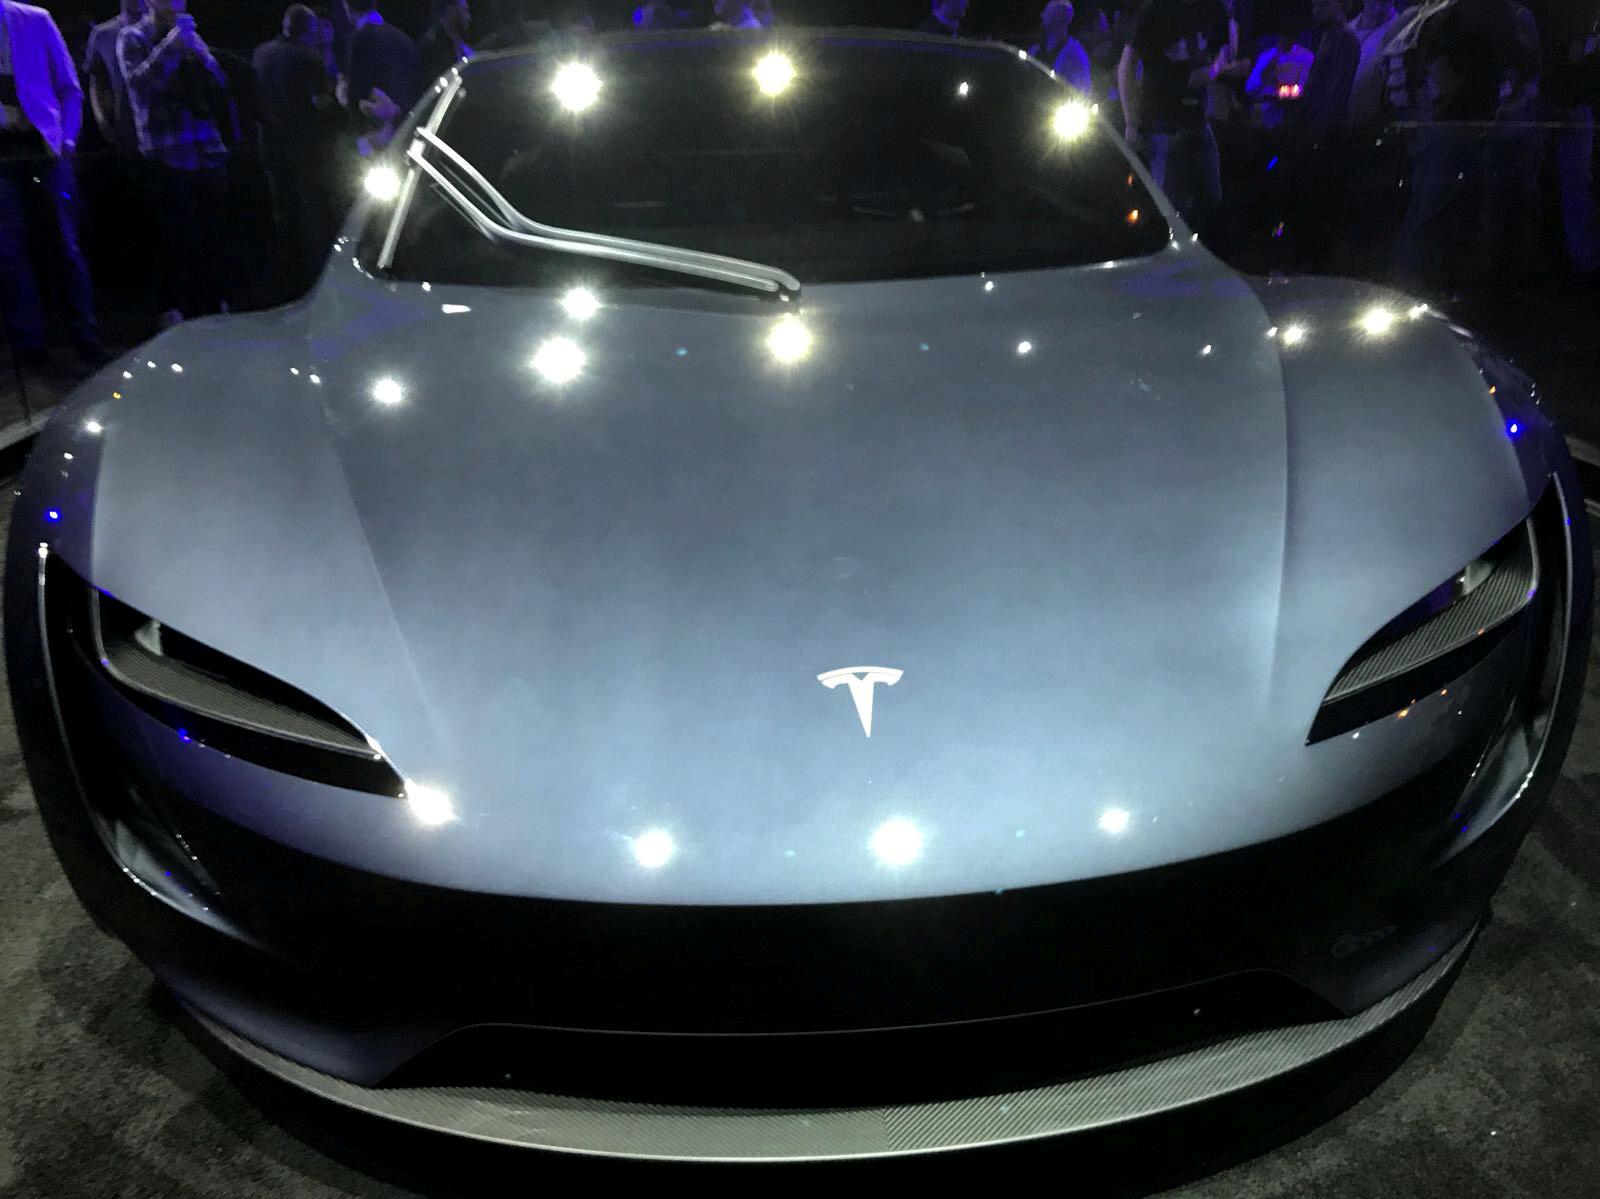 Tesla S Roadster Shipment To Be Delayed Says Musk Reuters